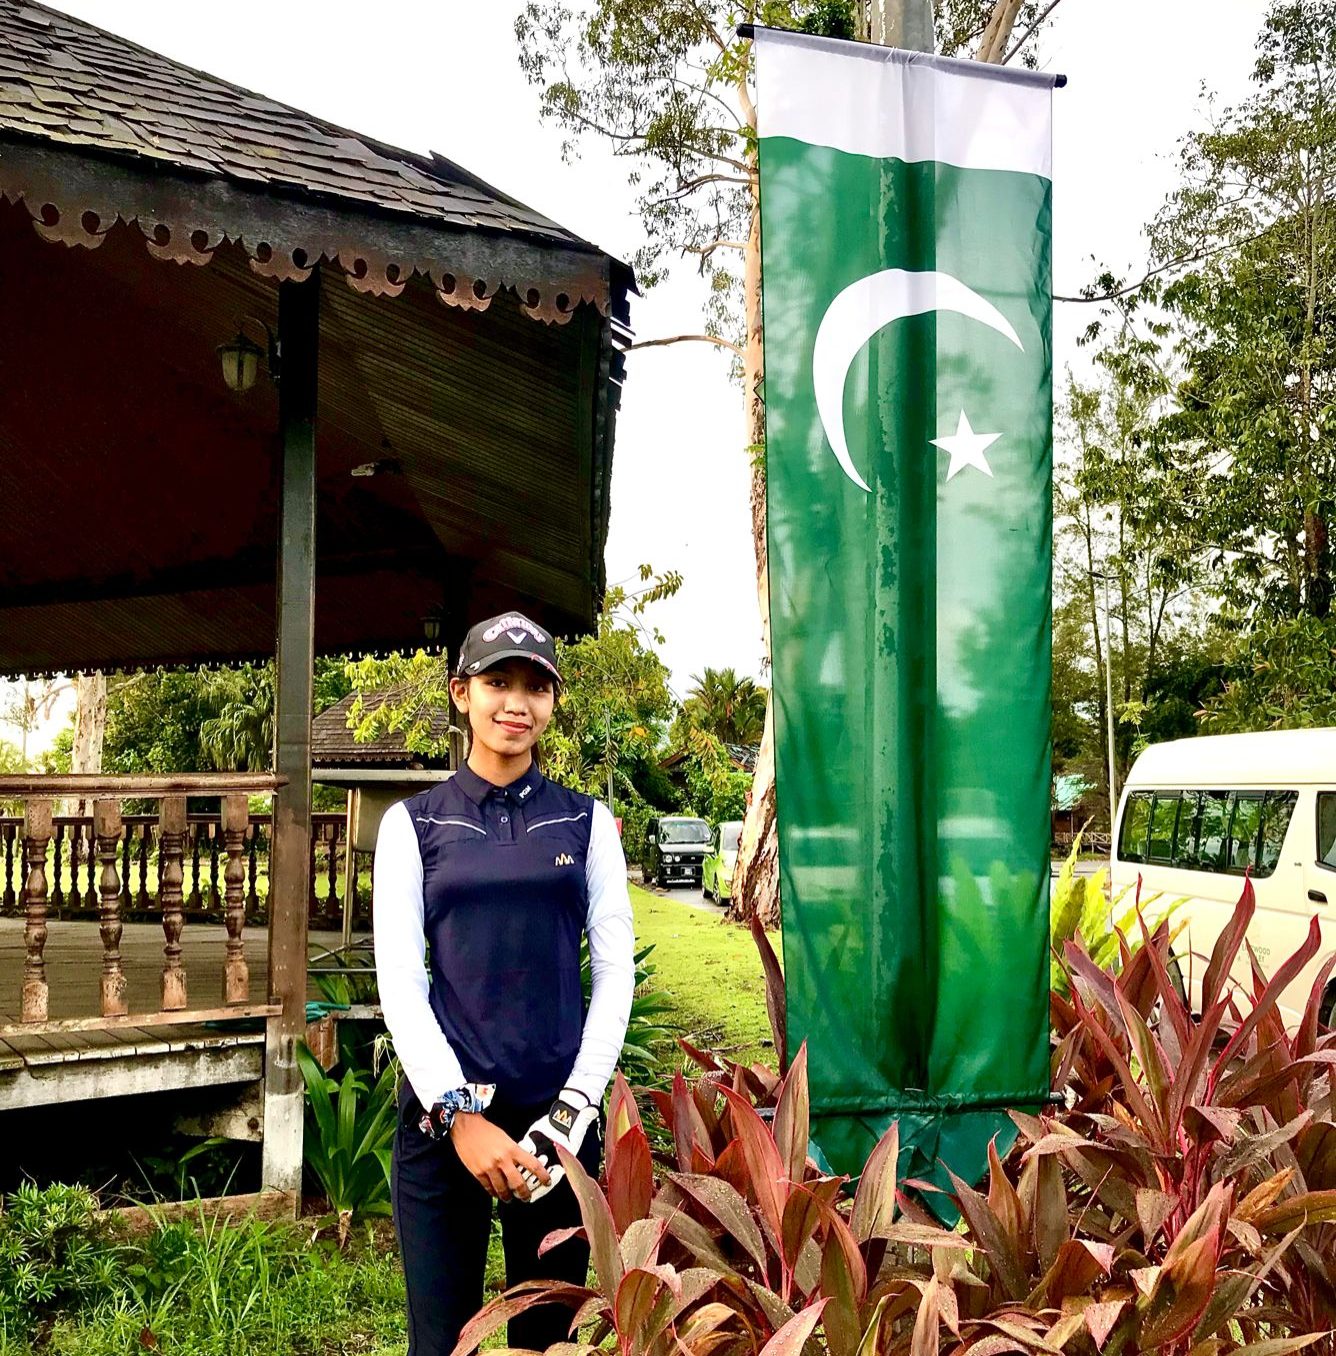 At the 22nd Sarawak Junior International Golf Championship in Malaysia, Arooba Ali, who is sponsored by the Pakistani real estate firm AAA Associates, will represent Pakistan